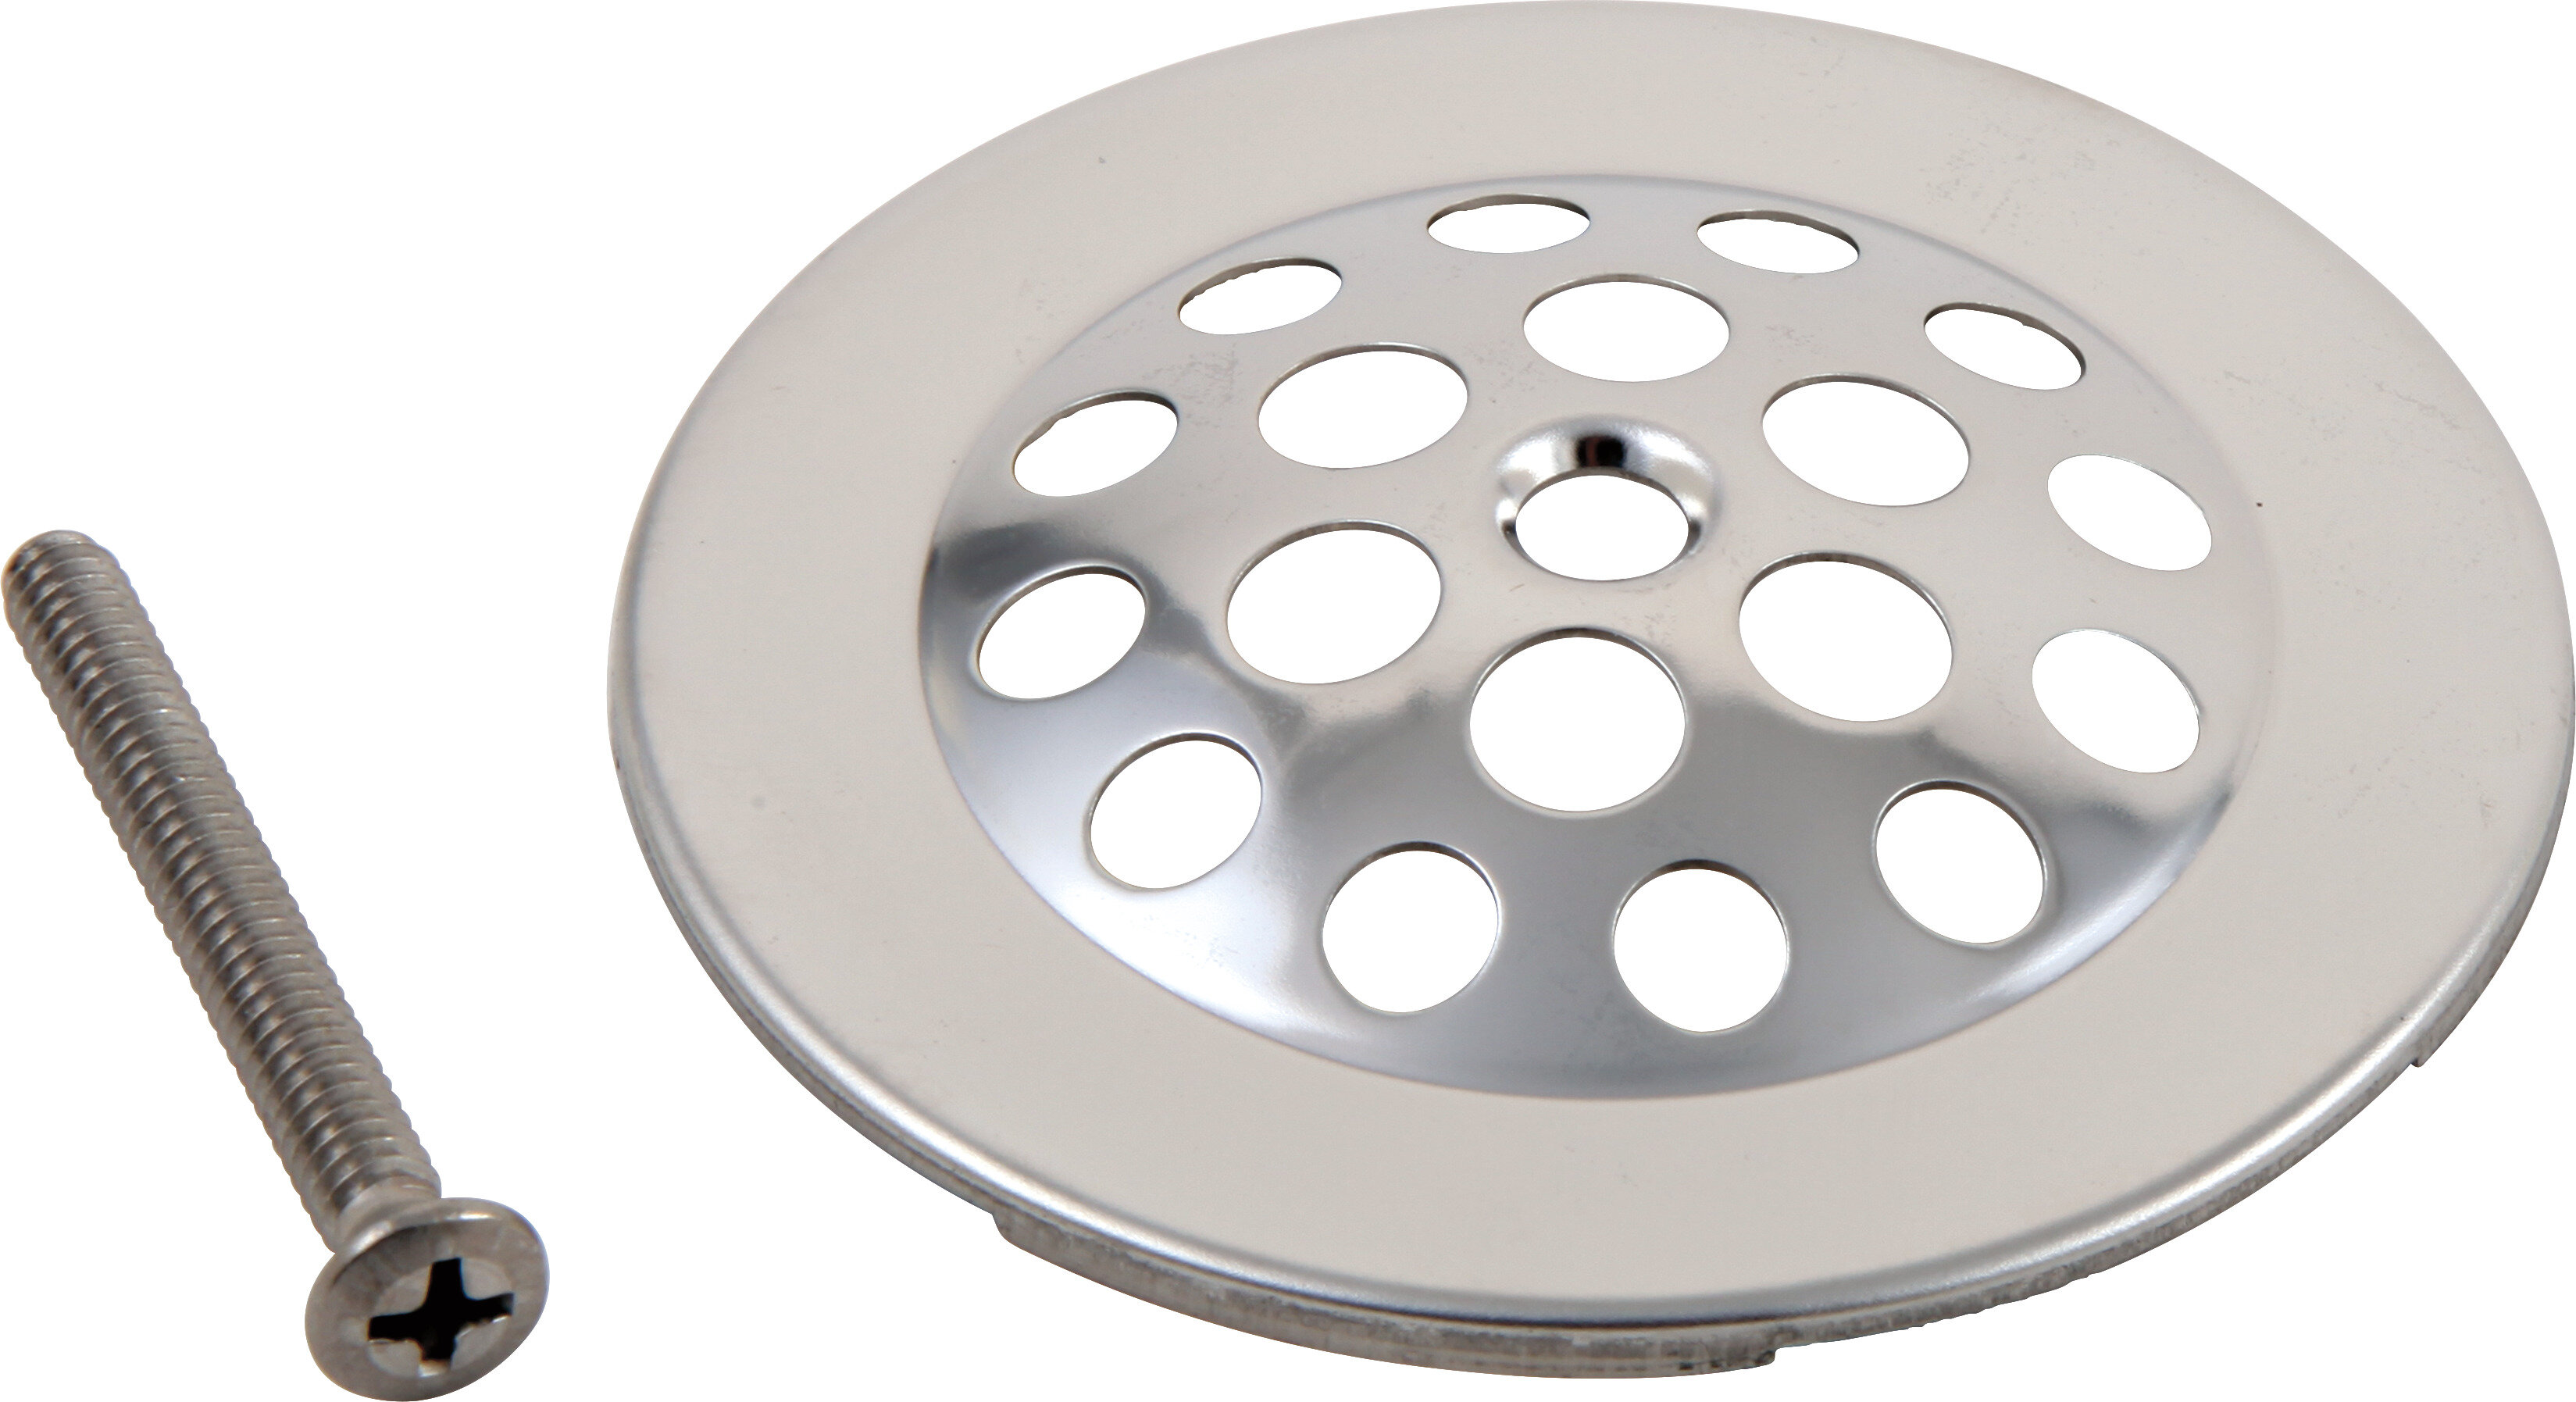 3.25 Inch Round Shower Drain Cover | Classic Scrolls No. 4